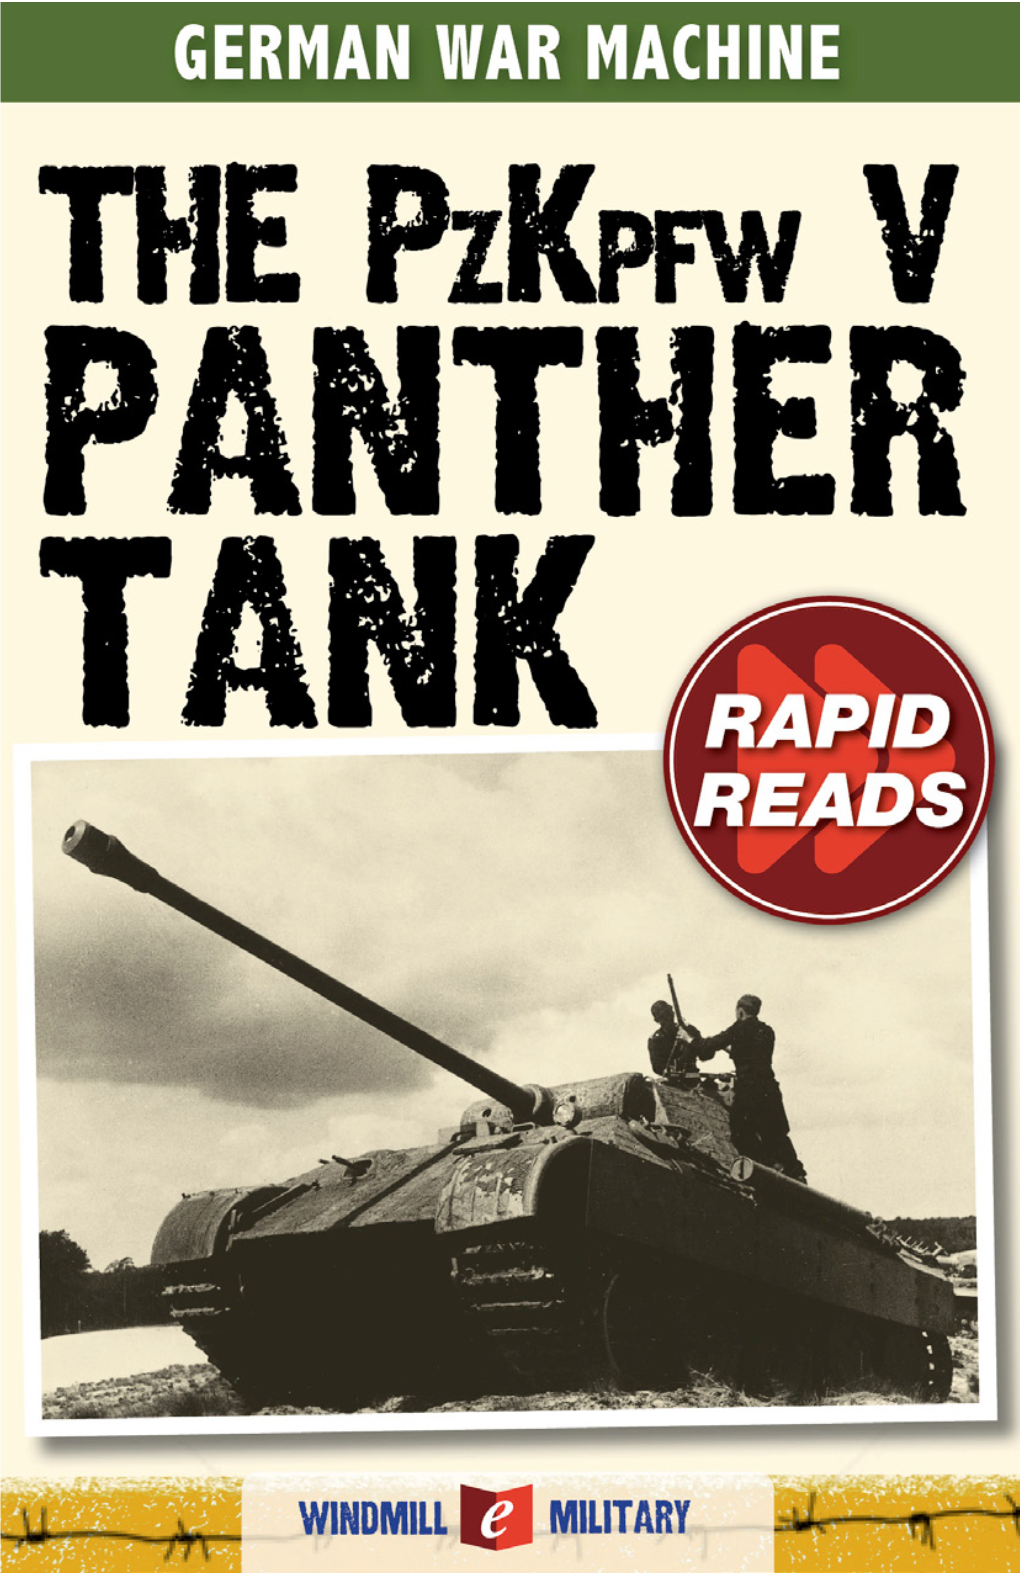 Rapid Reads This Short Ebook Is Part of the “Rapid Reads” Series on the German Army of World War II